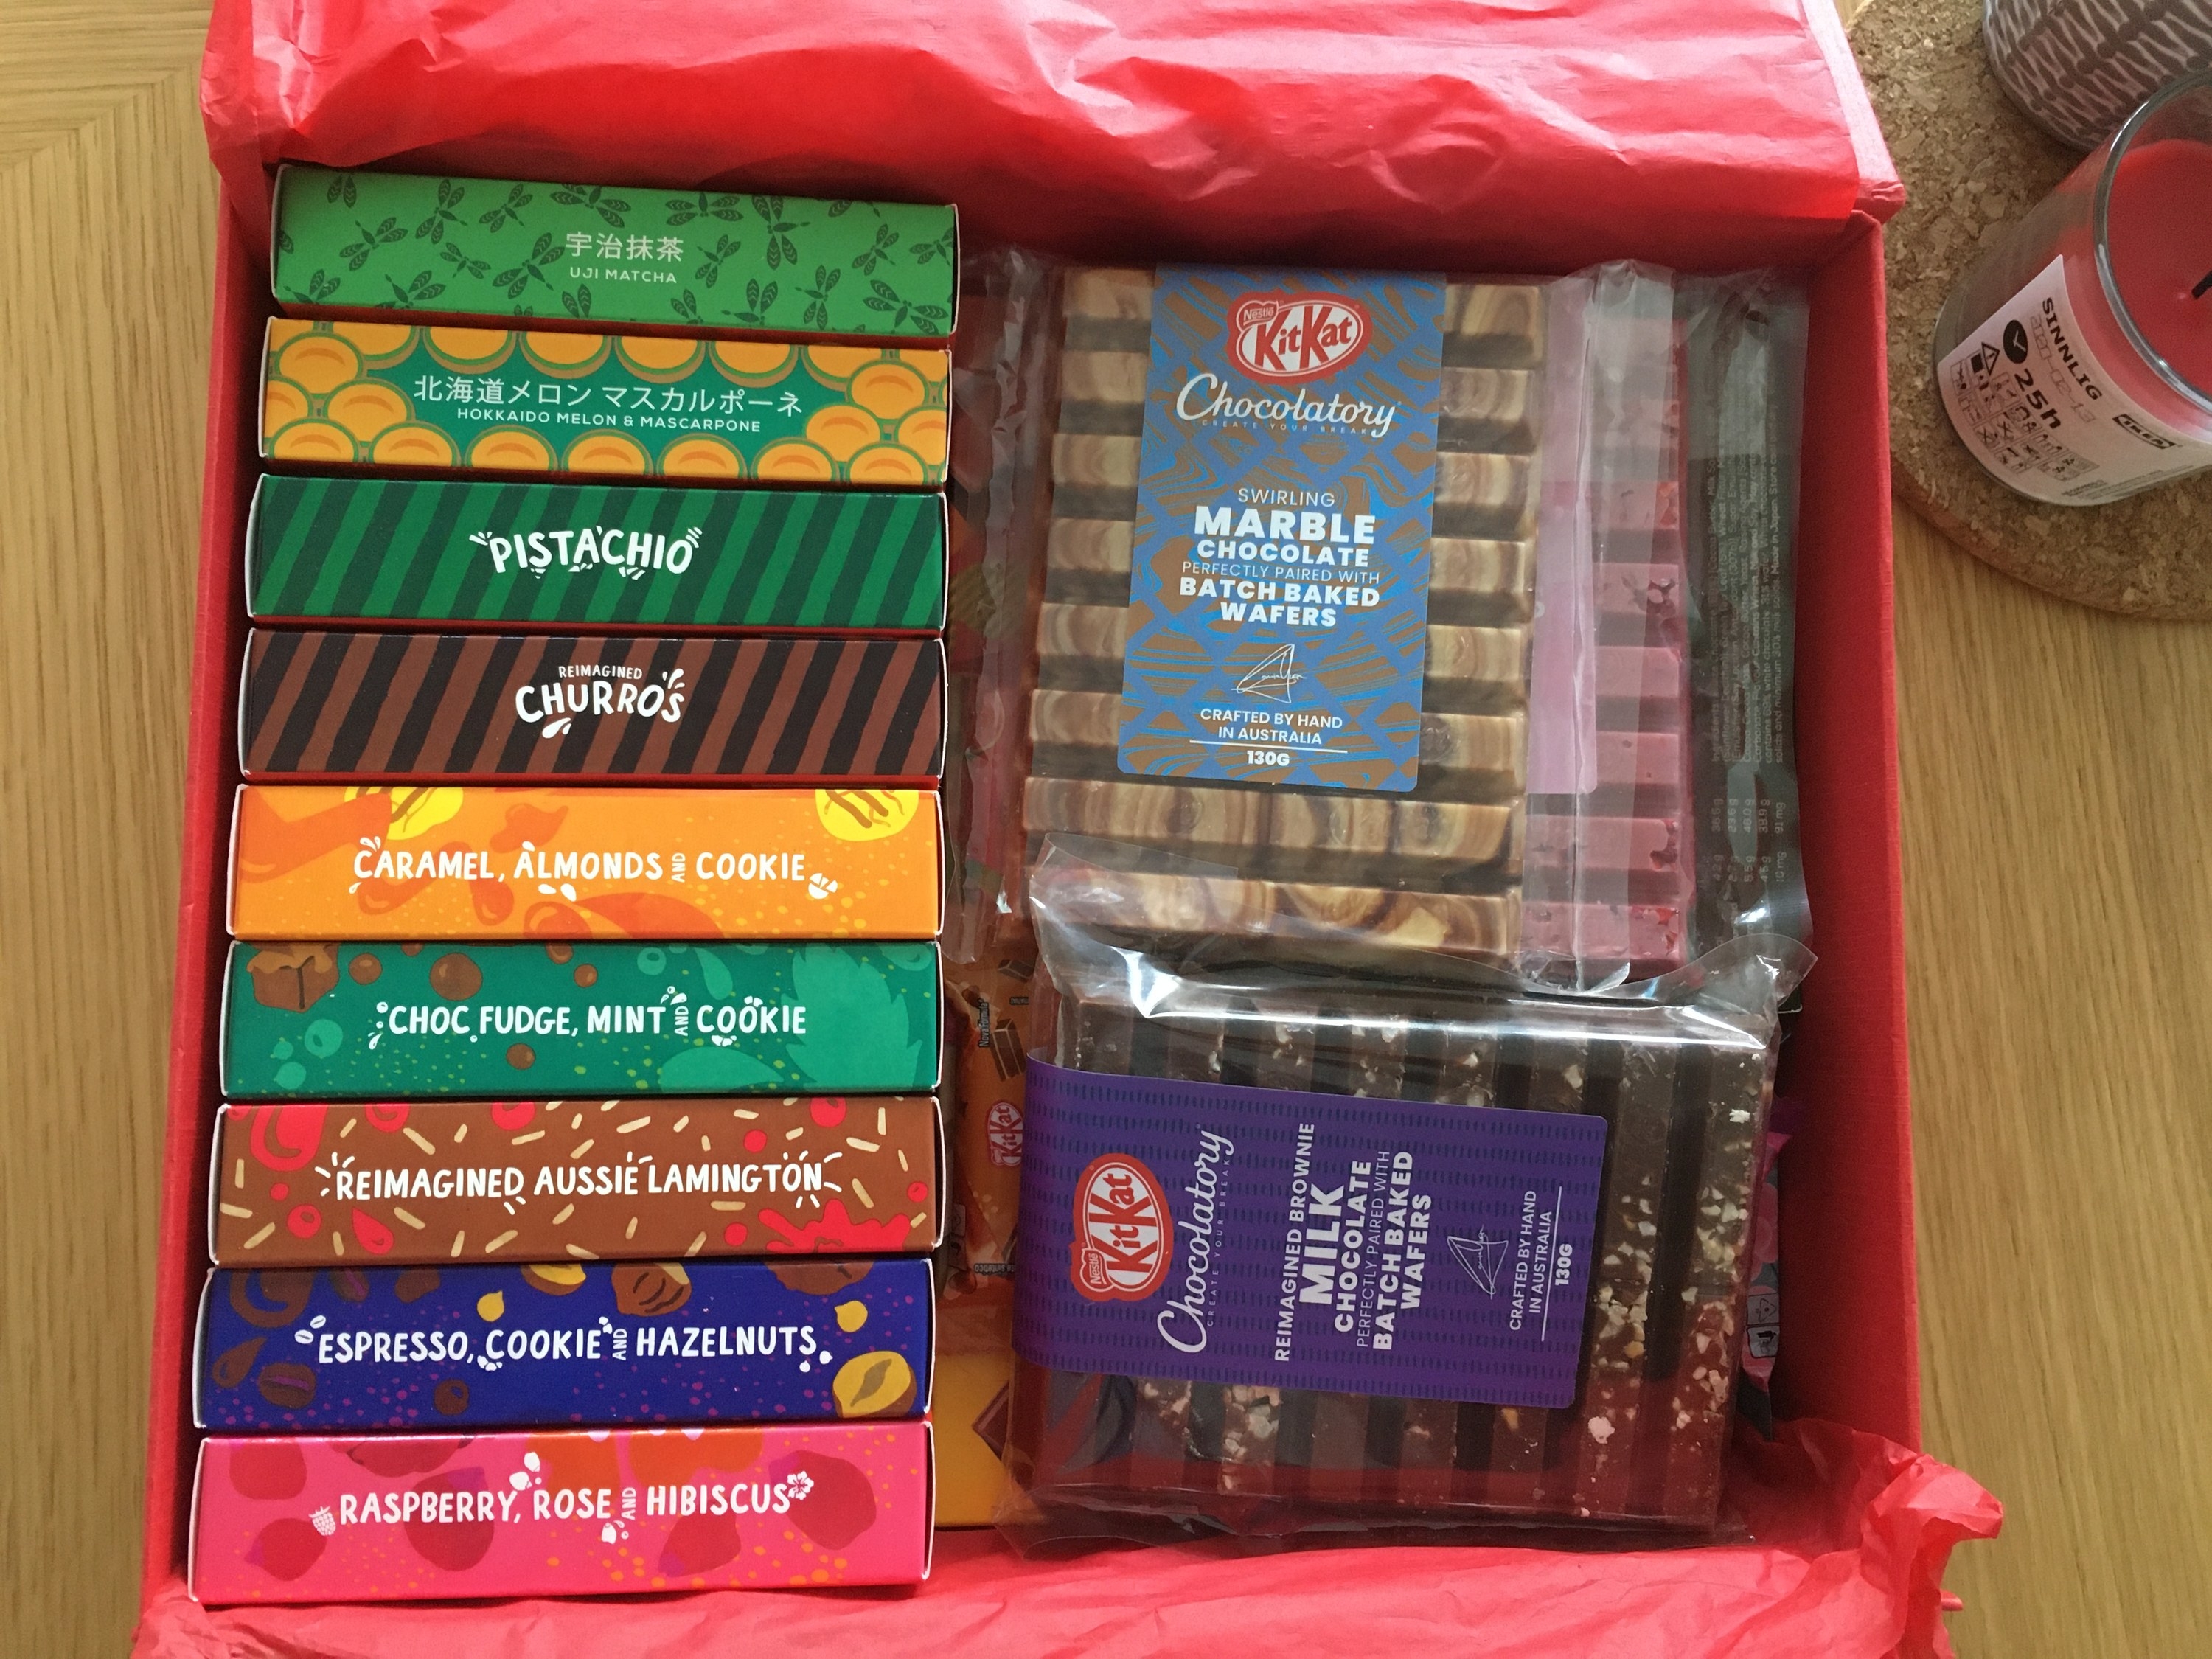 Box filled with different products from KitKat